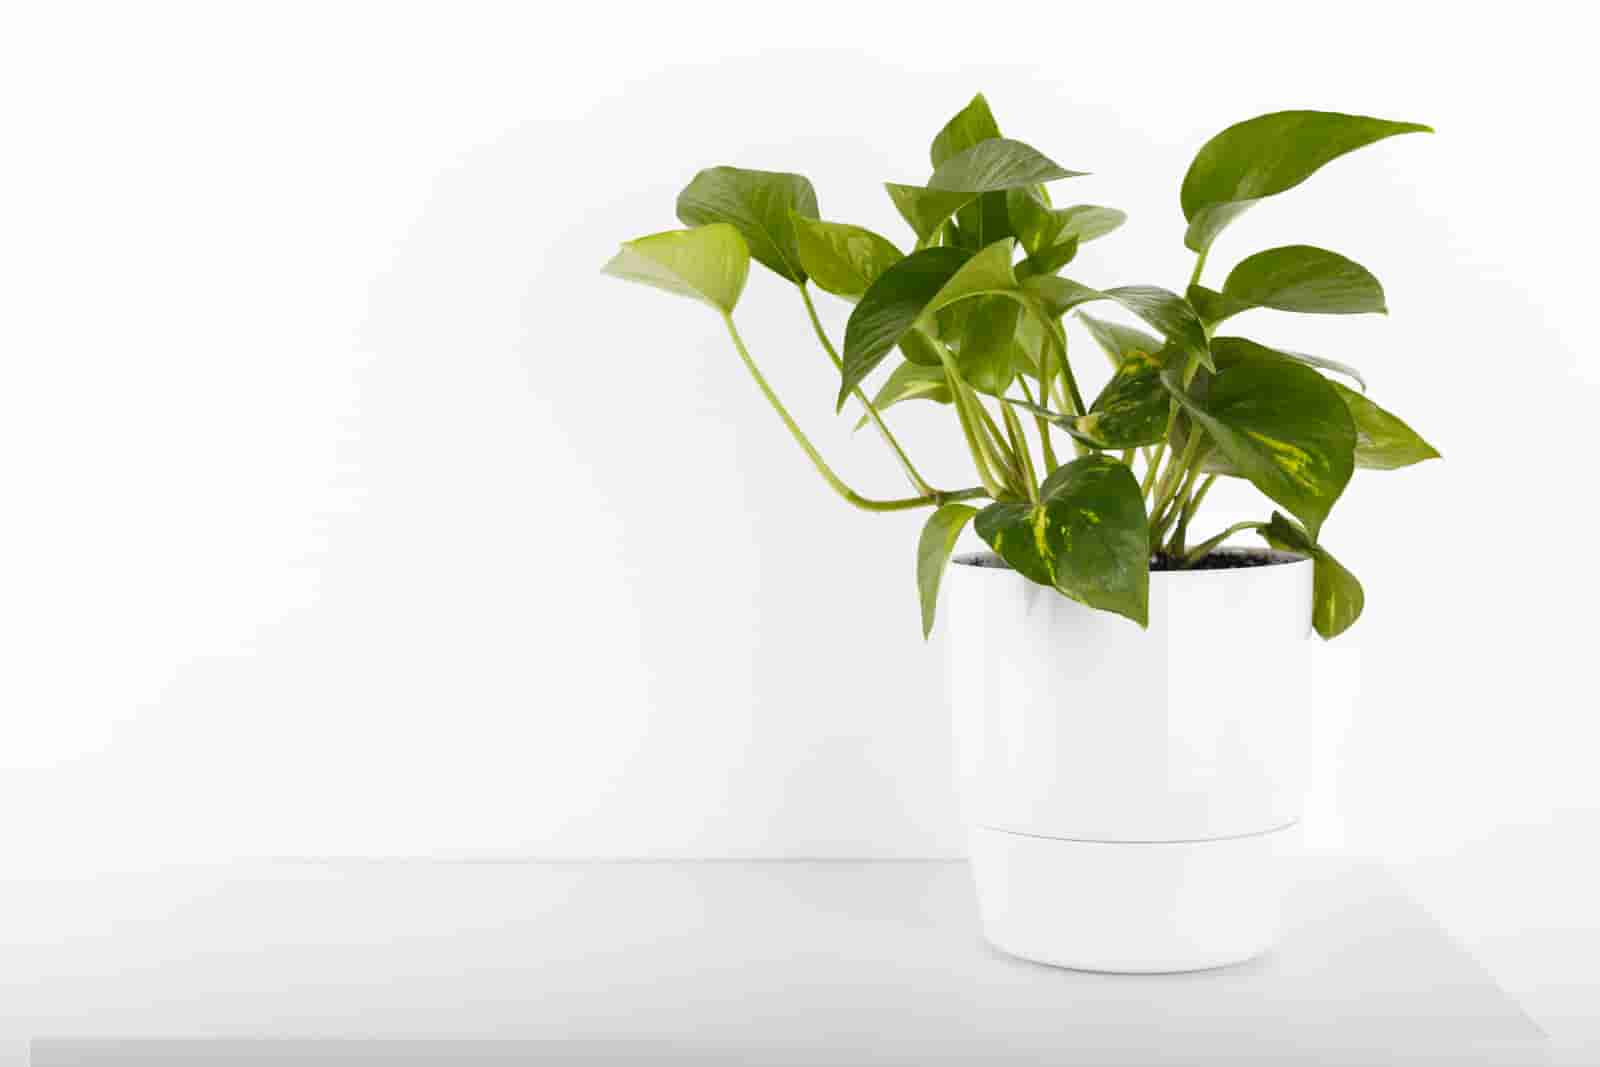 How To Make Pothos Fuller? [ Here Are 5 Important Ways ]